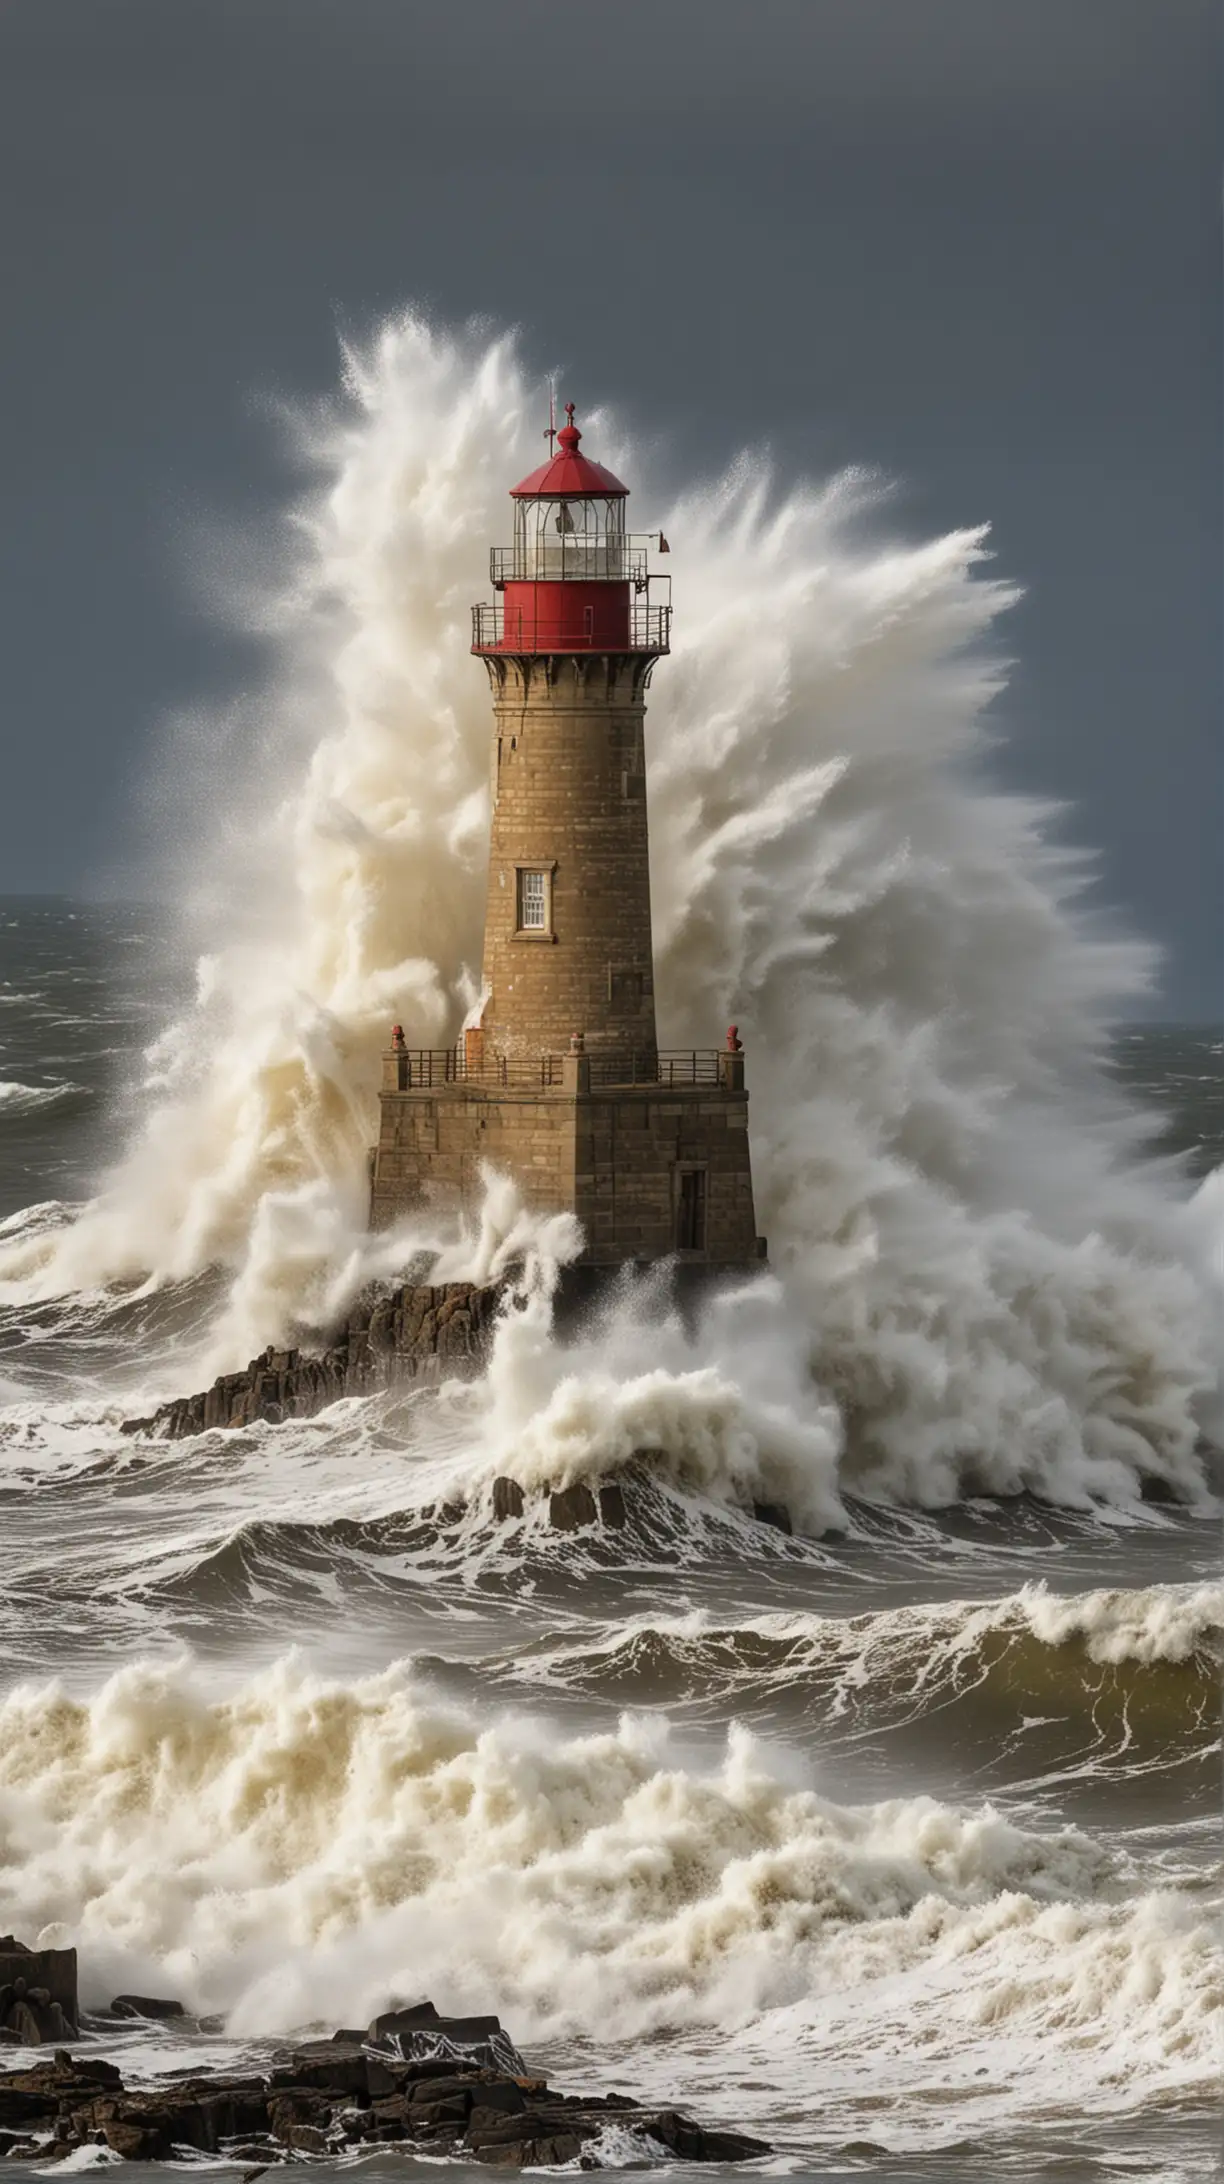 Majestic Lighthouse Weathering Stormy Waves